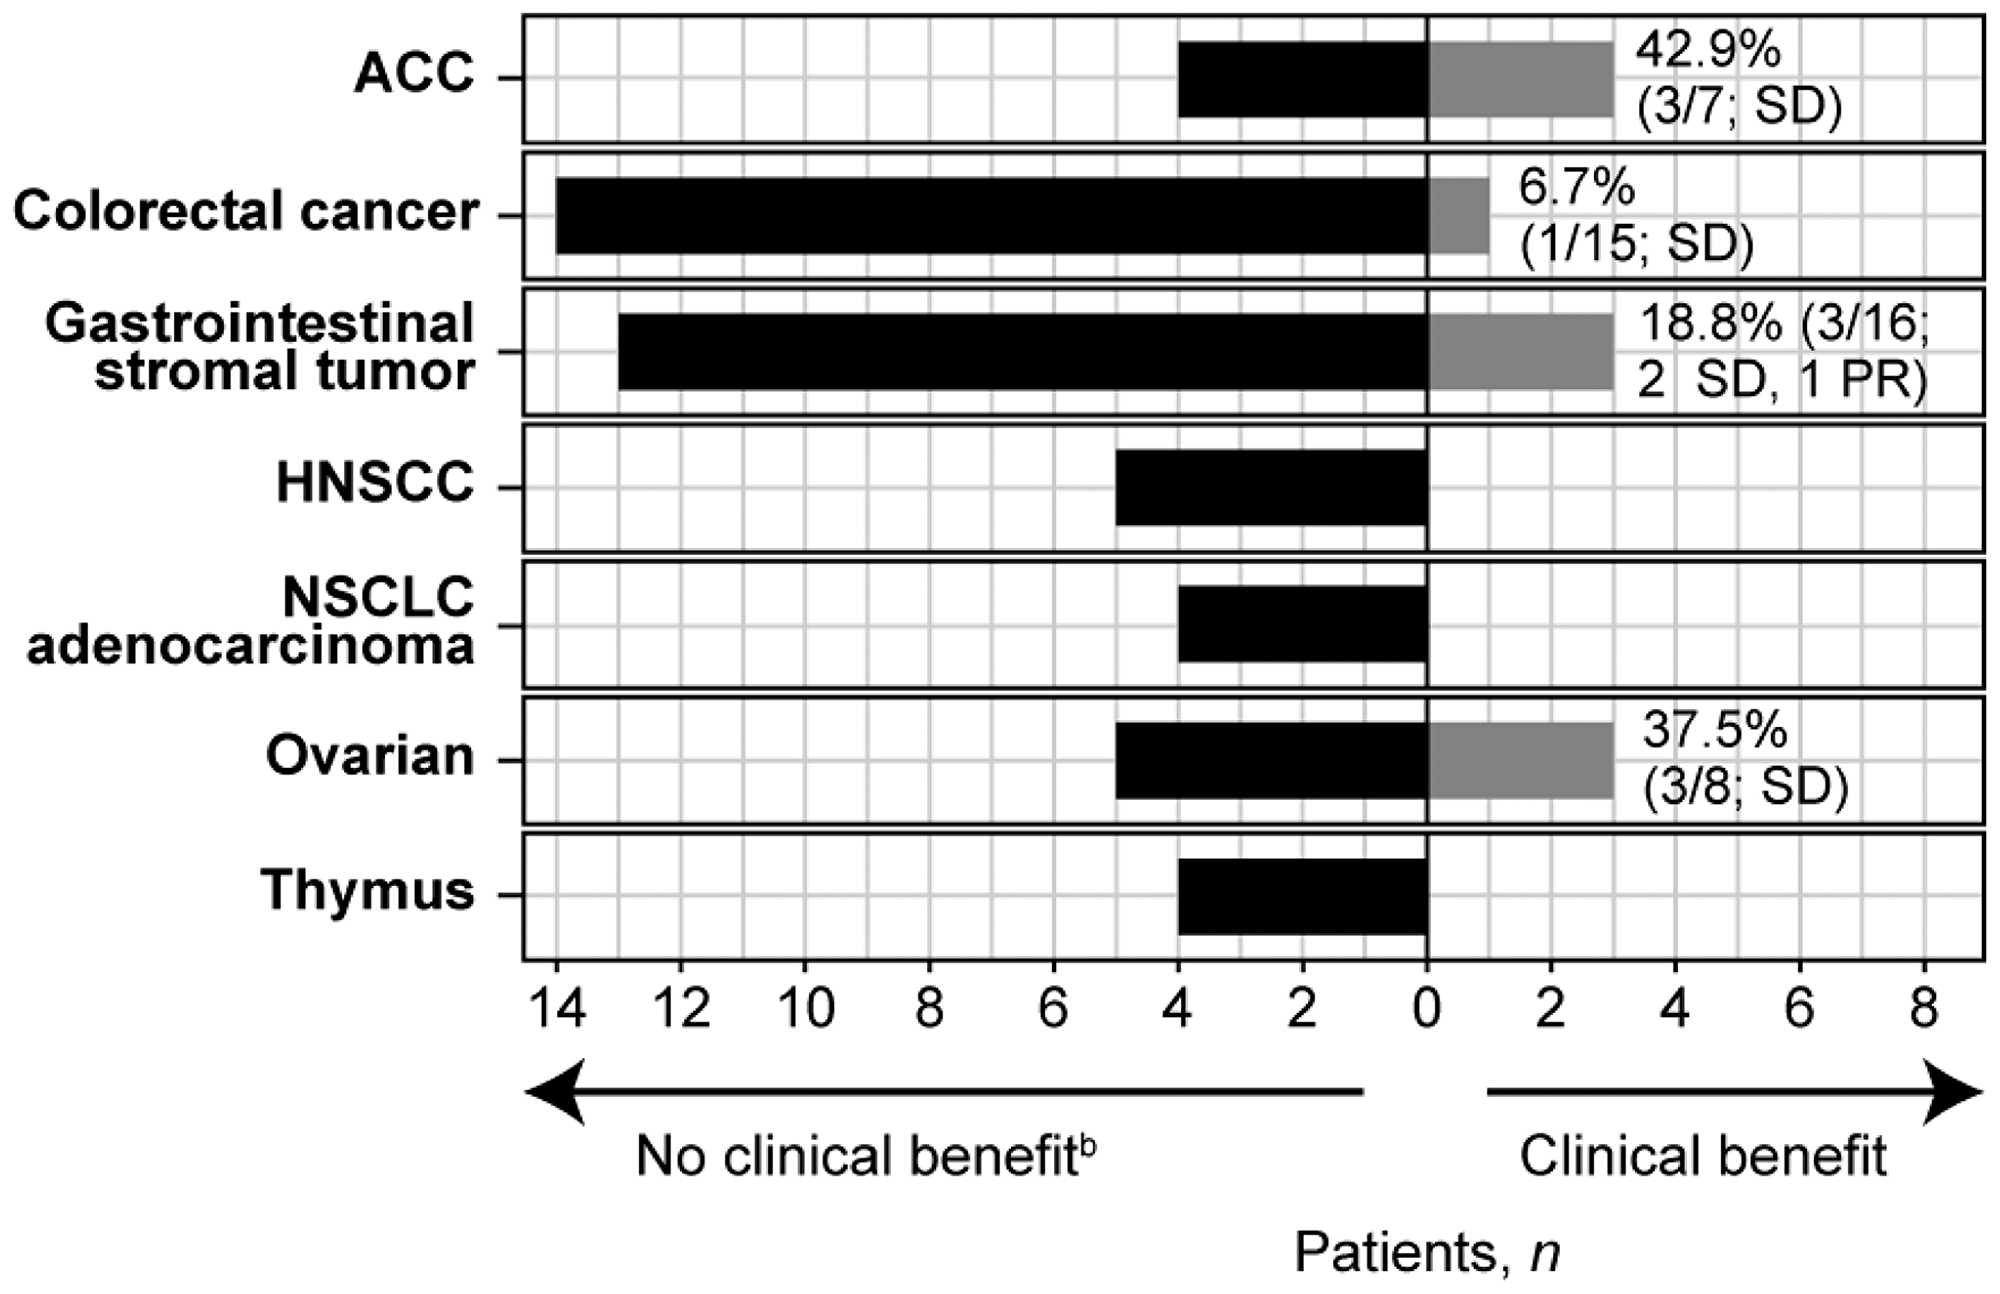 Figure 1: Clinical benefit per tumor type cohort<sup>a</sup>.